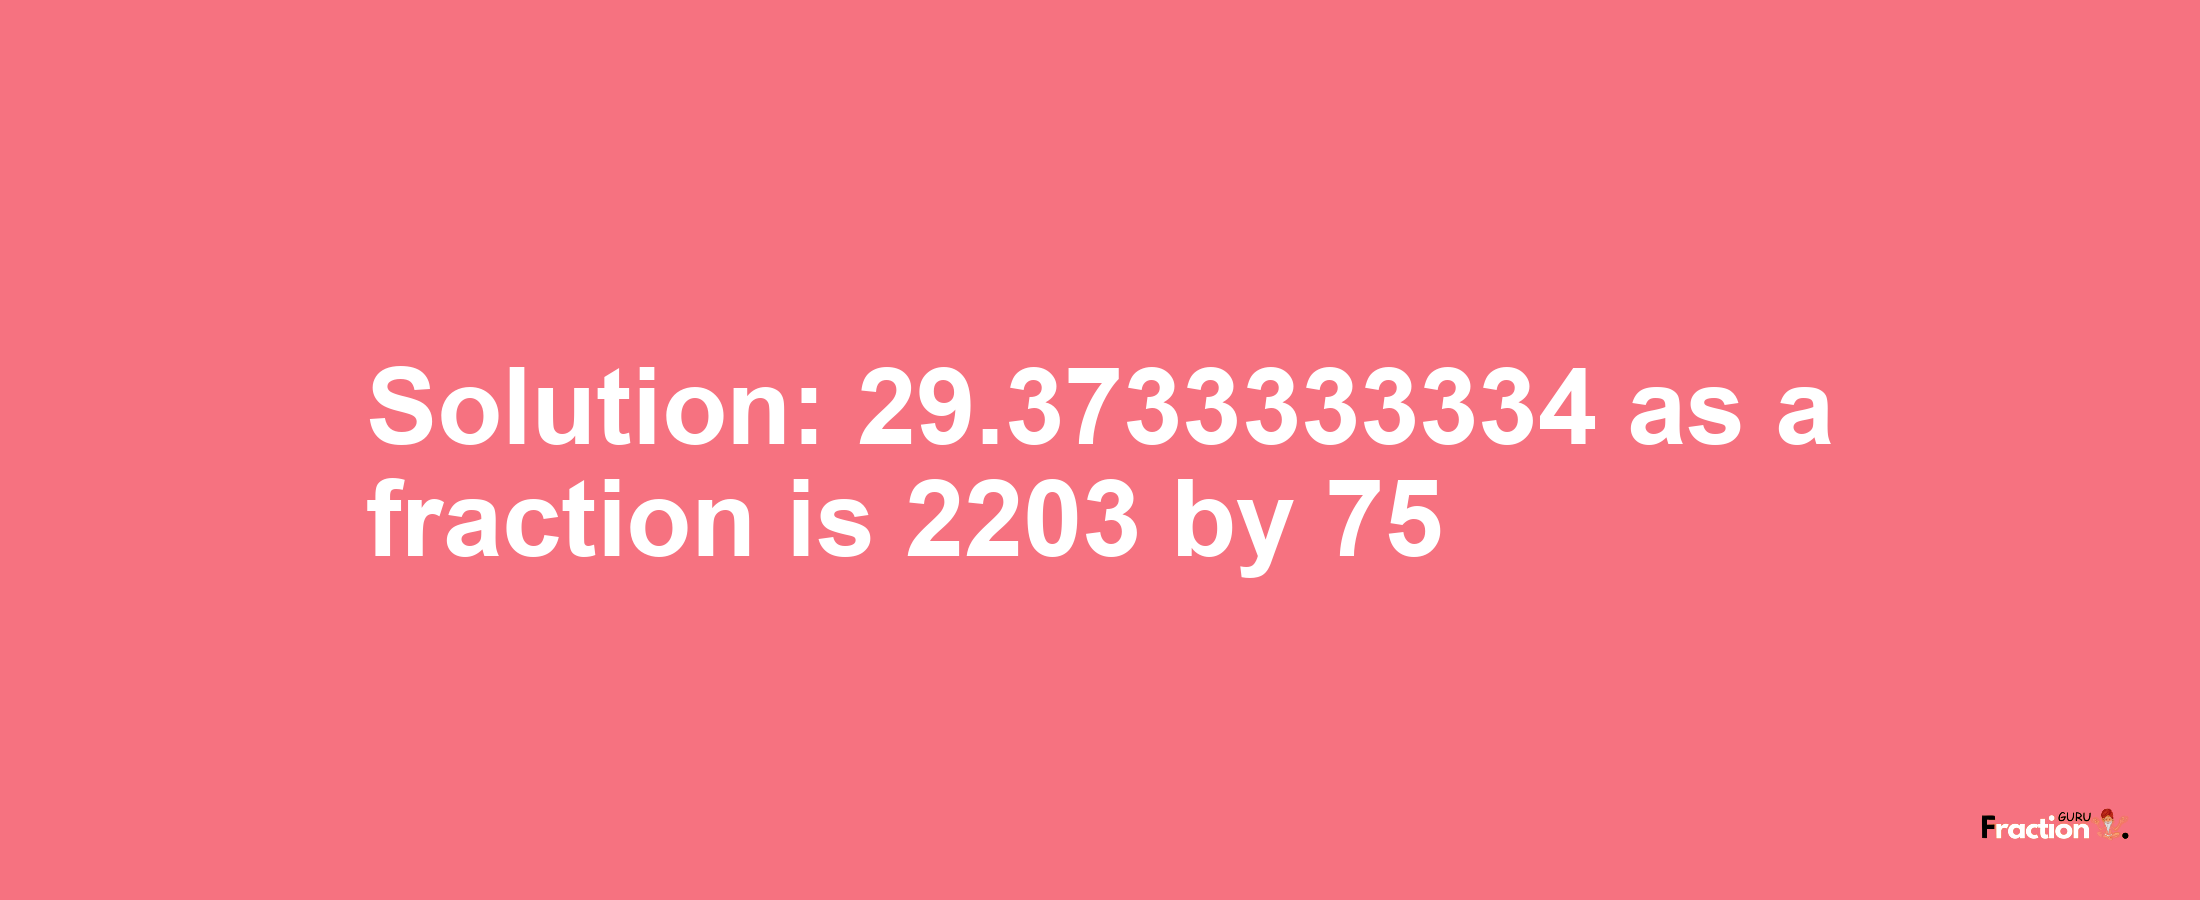 Solution:29.3733333334 as a fraction is 2203/75